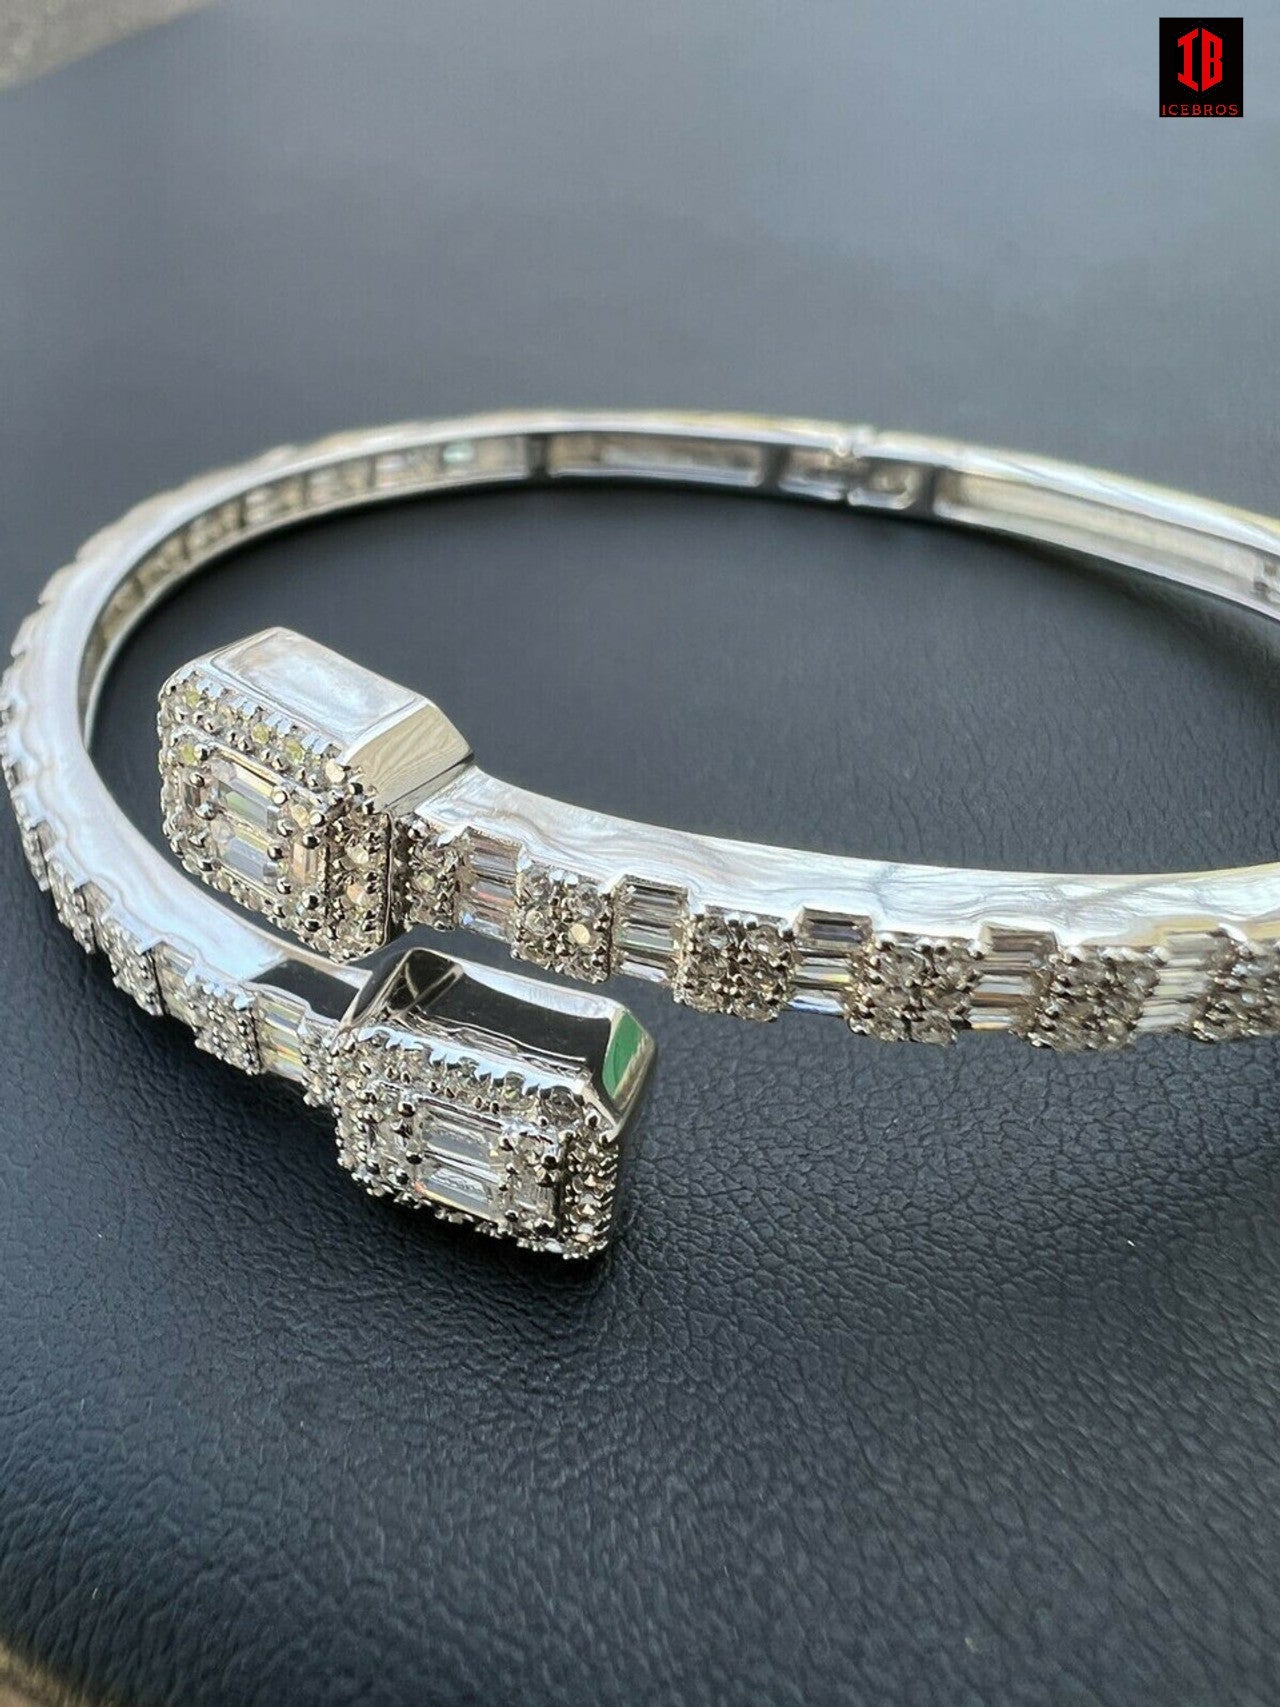 Real Solid 925 Silver Iced Baguette Bangle Cuff Bracelet 6-7.5" Man Made Diamond